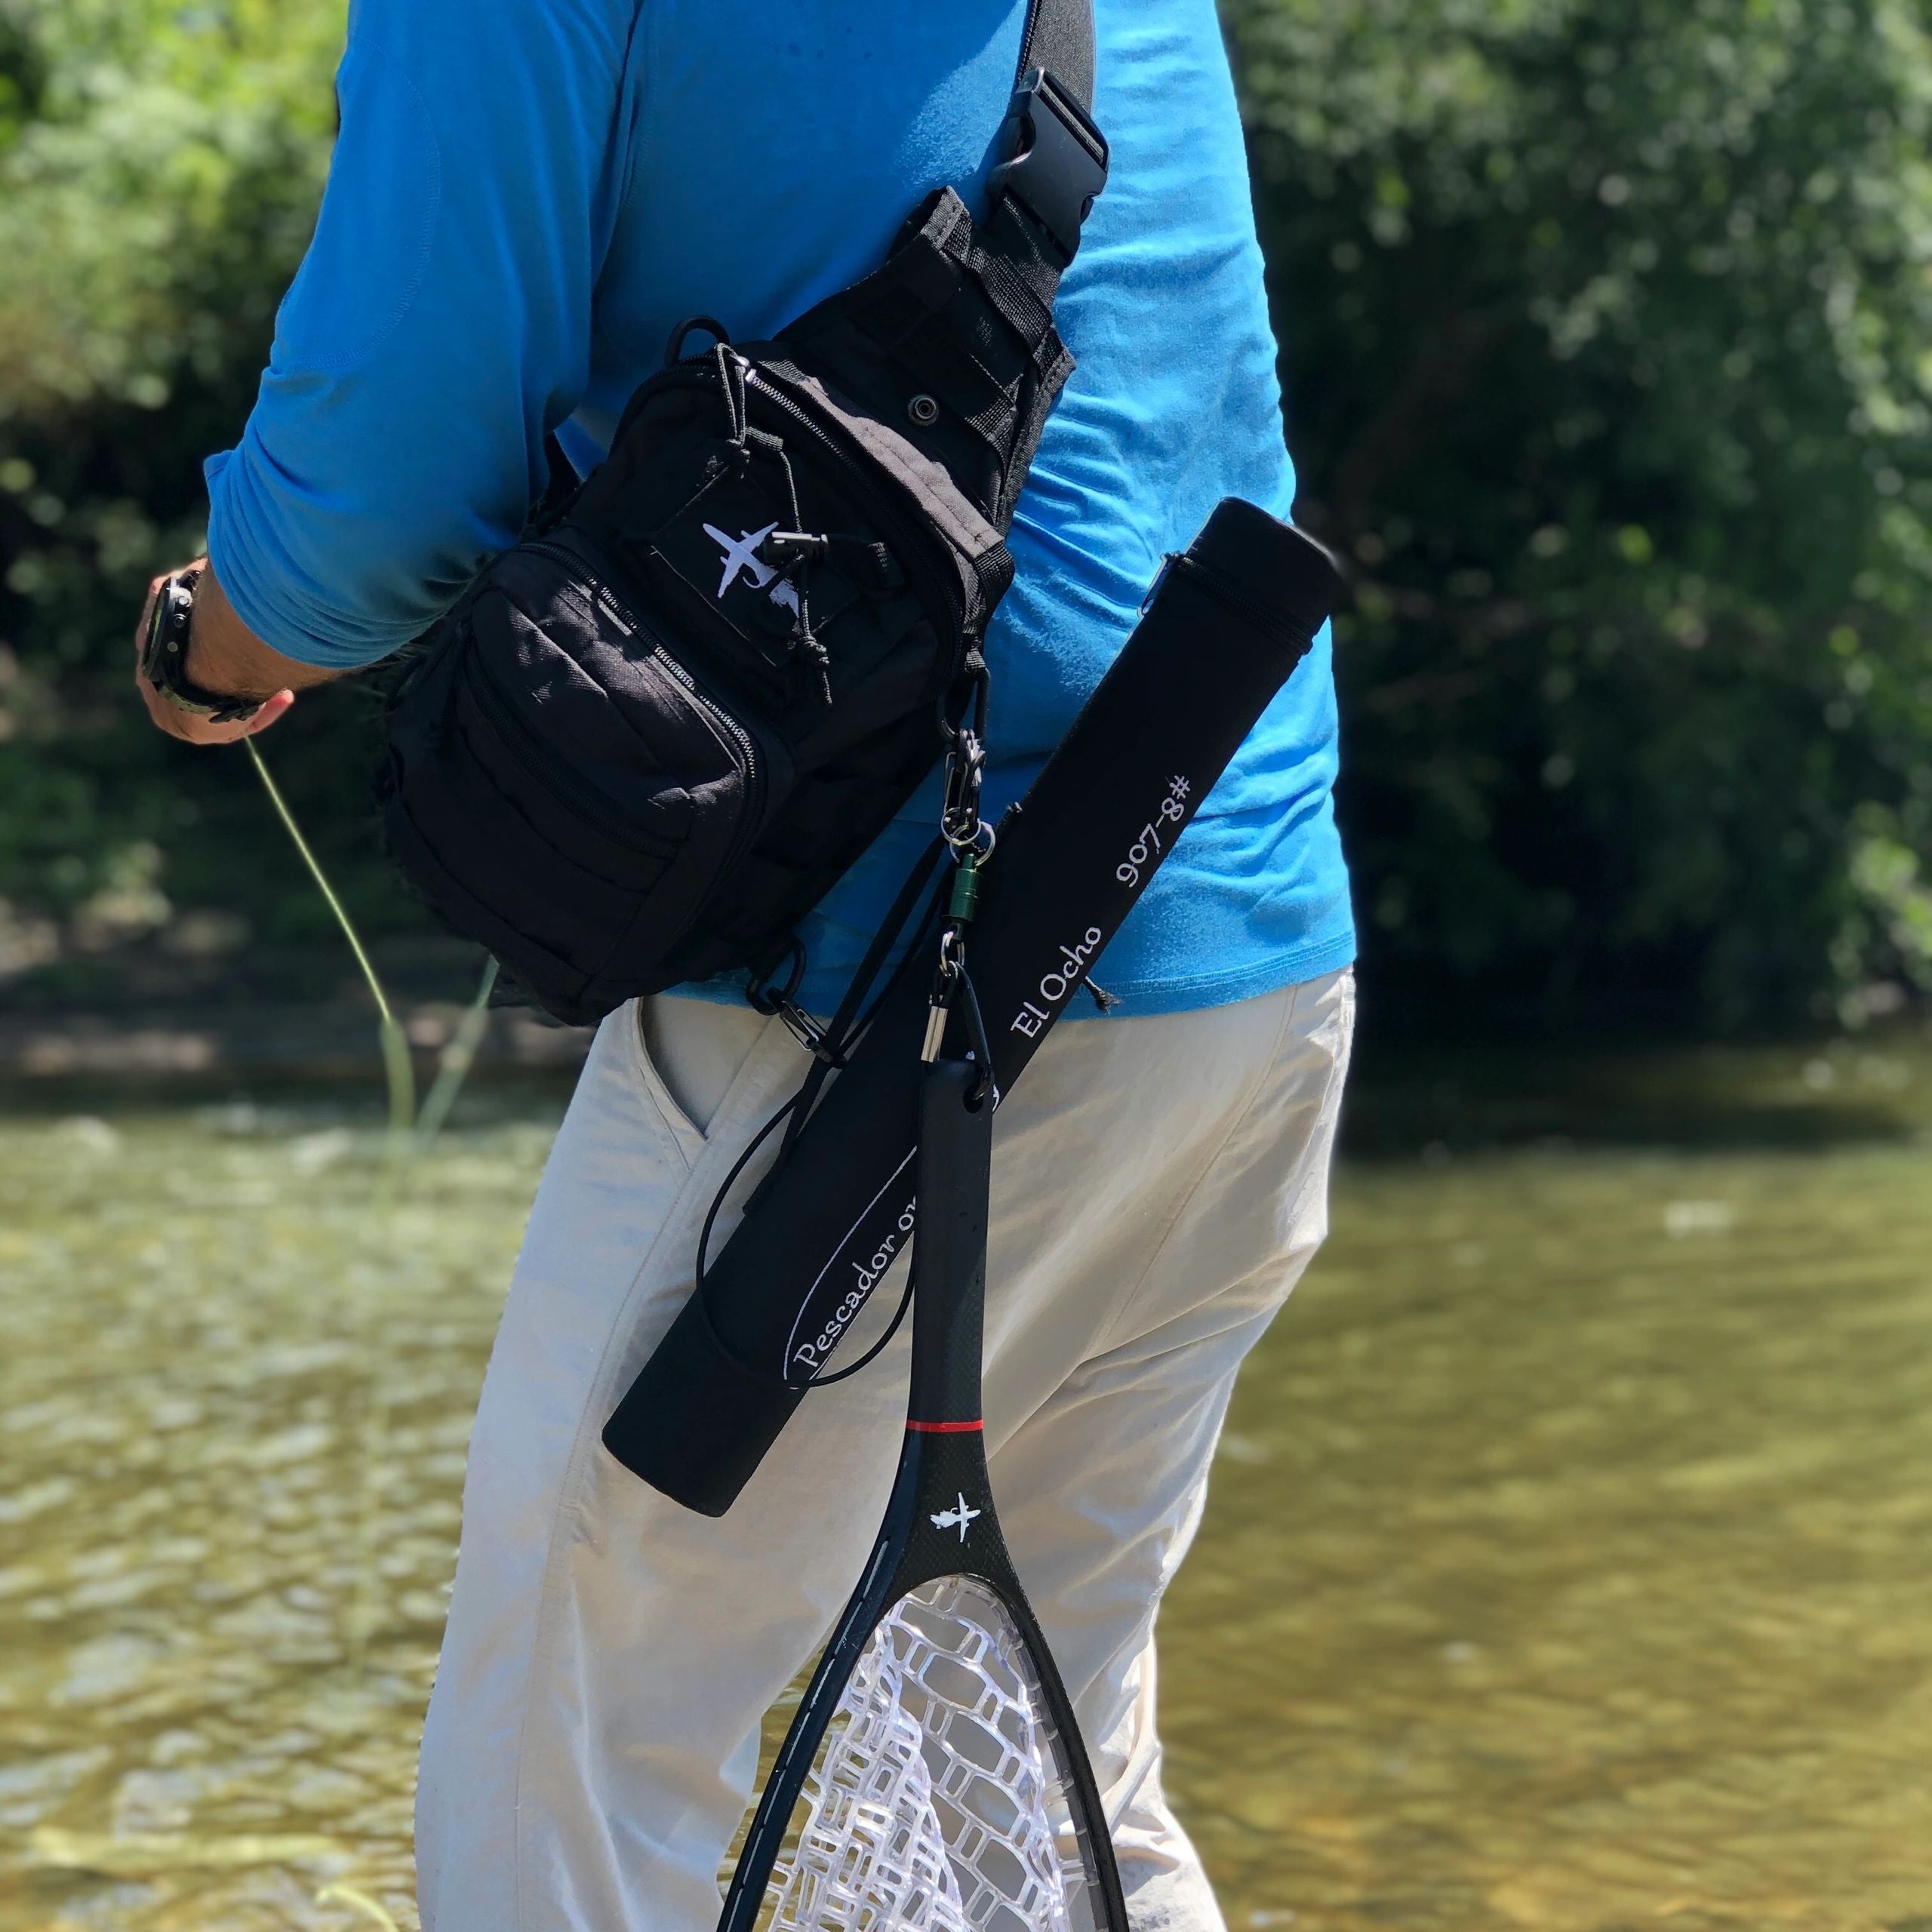 GO-PACK SLING PACK  BUDGET FRIENDLY FLY FISHING SLING PACK